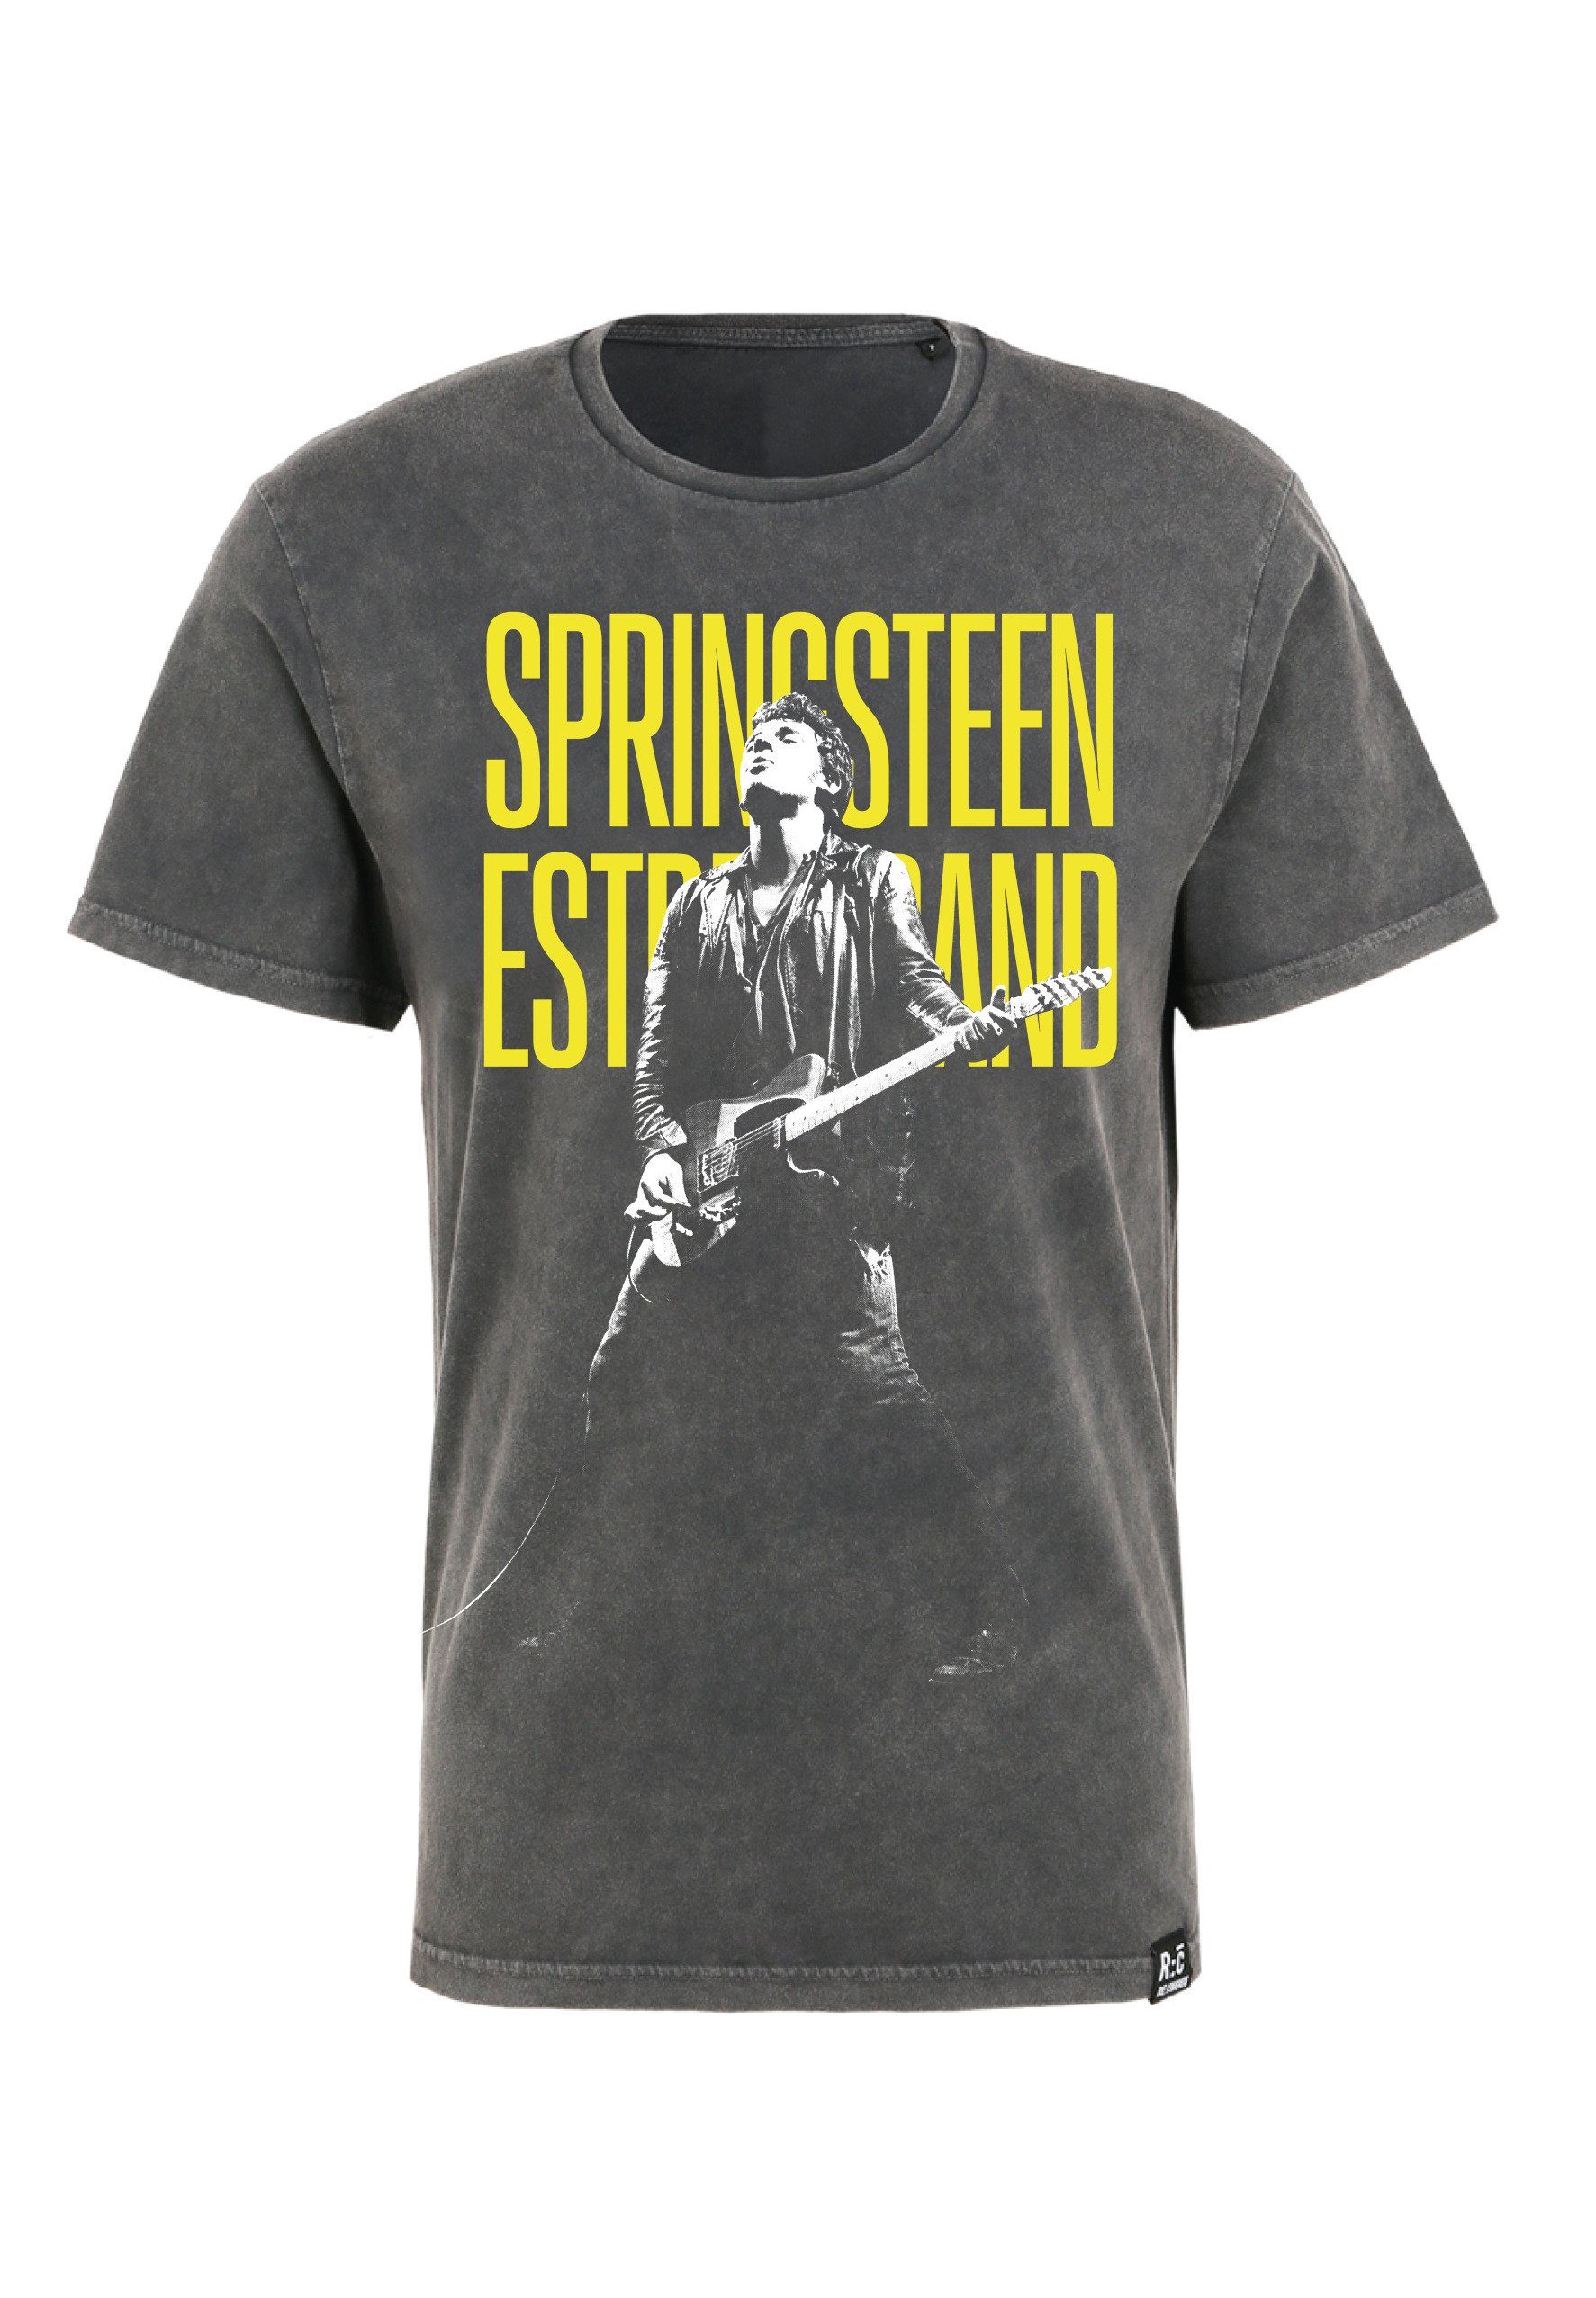 Guitar Recovered Springsteen T-Shirt Bio-Baumwolle Relaxed GOTS Washed Bruce zertifizierte